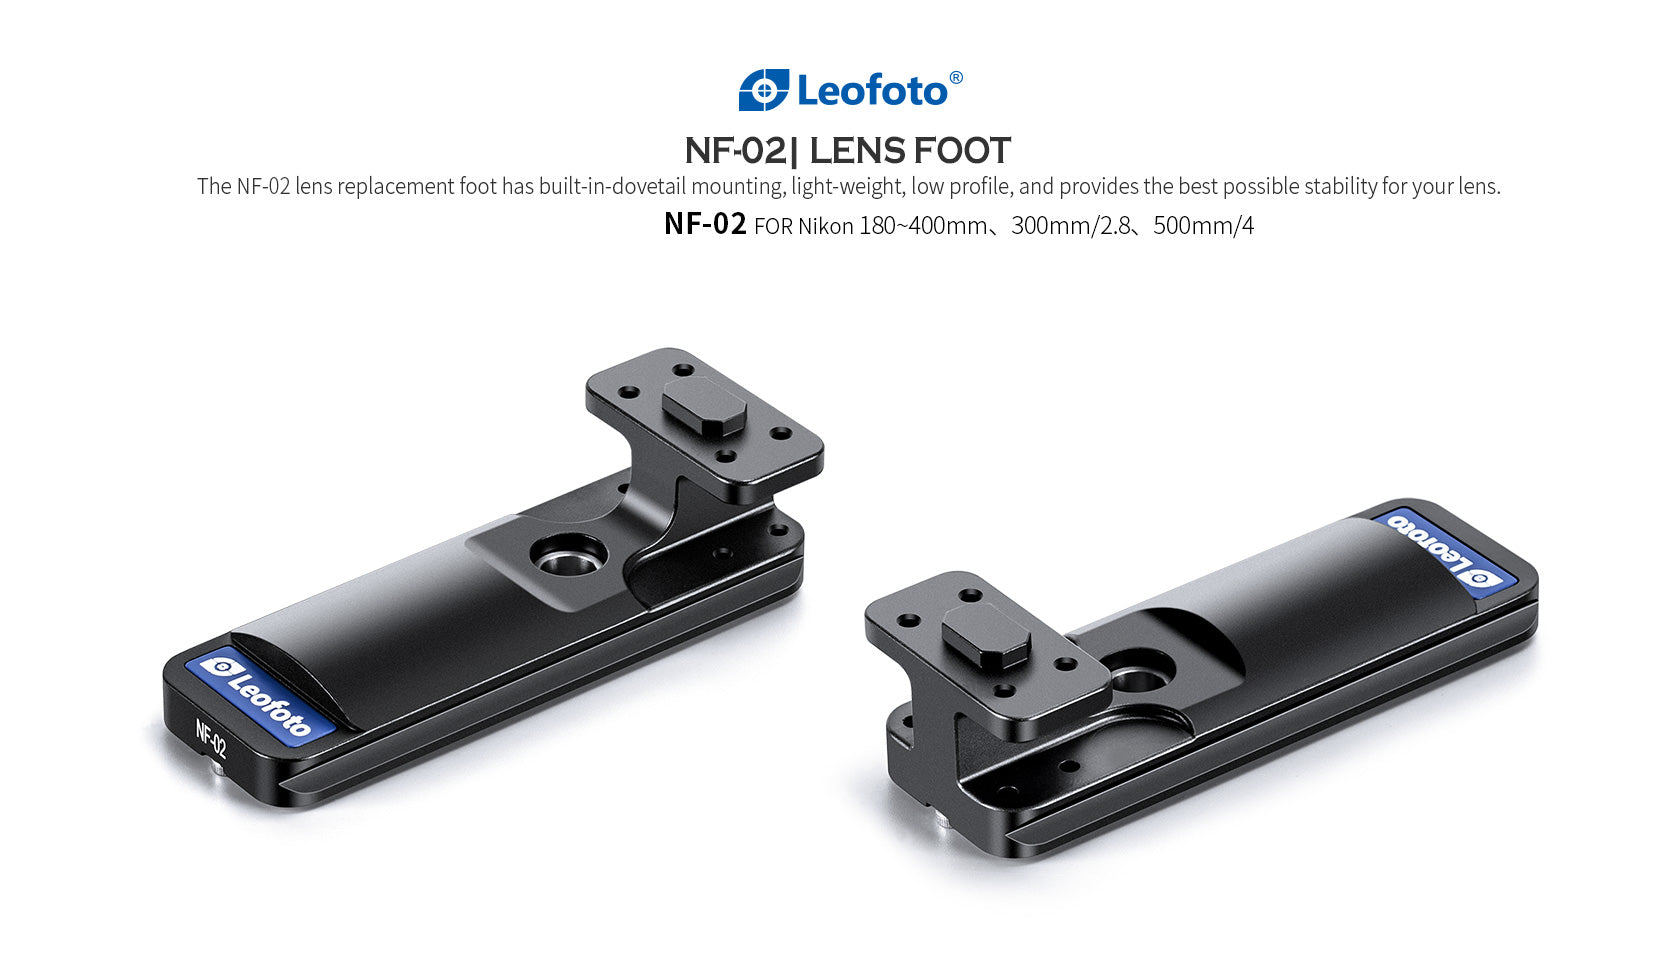 Leofoto NF-02 Replacement Foot for NIKON 200~400 F/4, 180~400  F/4,300/2.8,500mm F/4